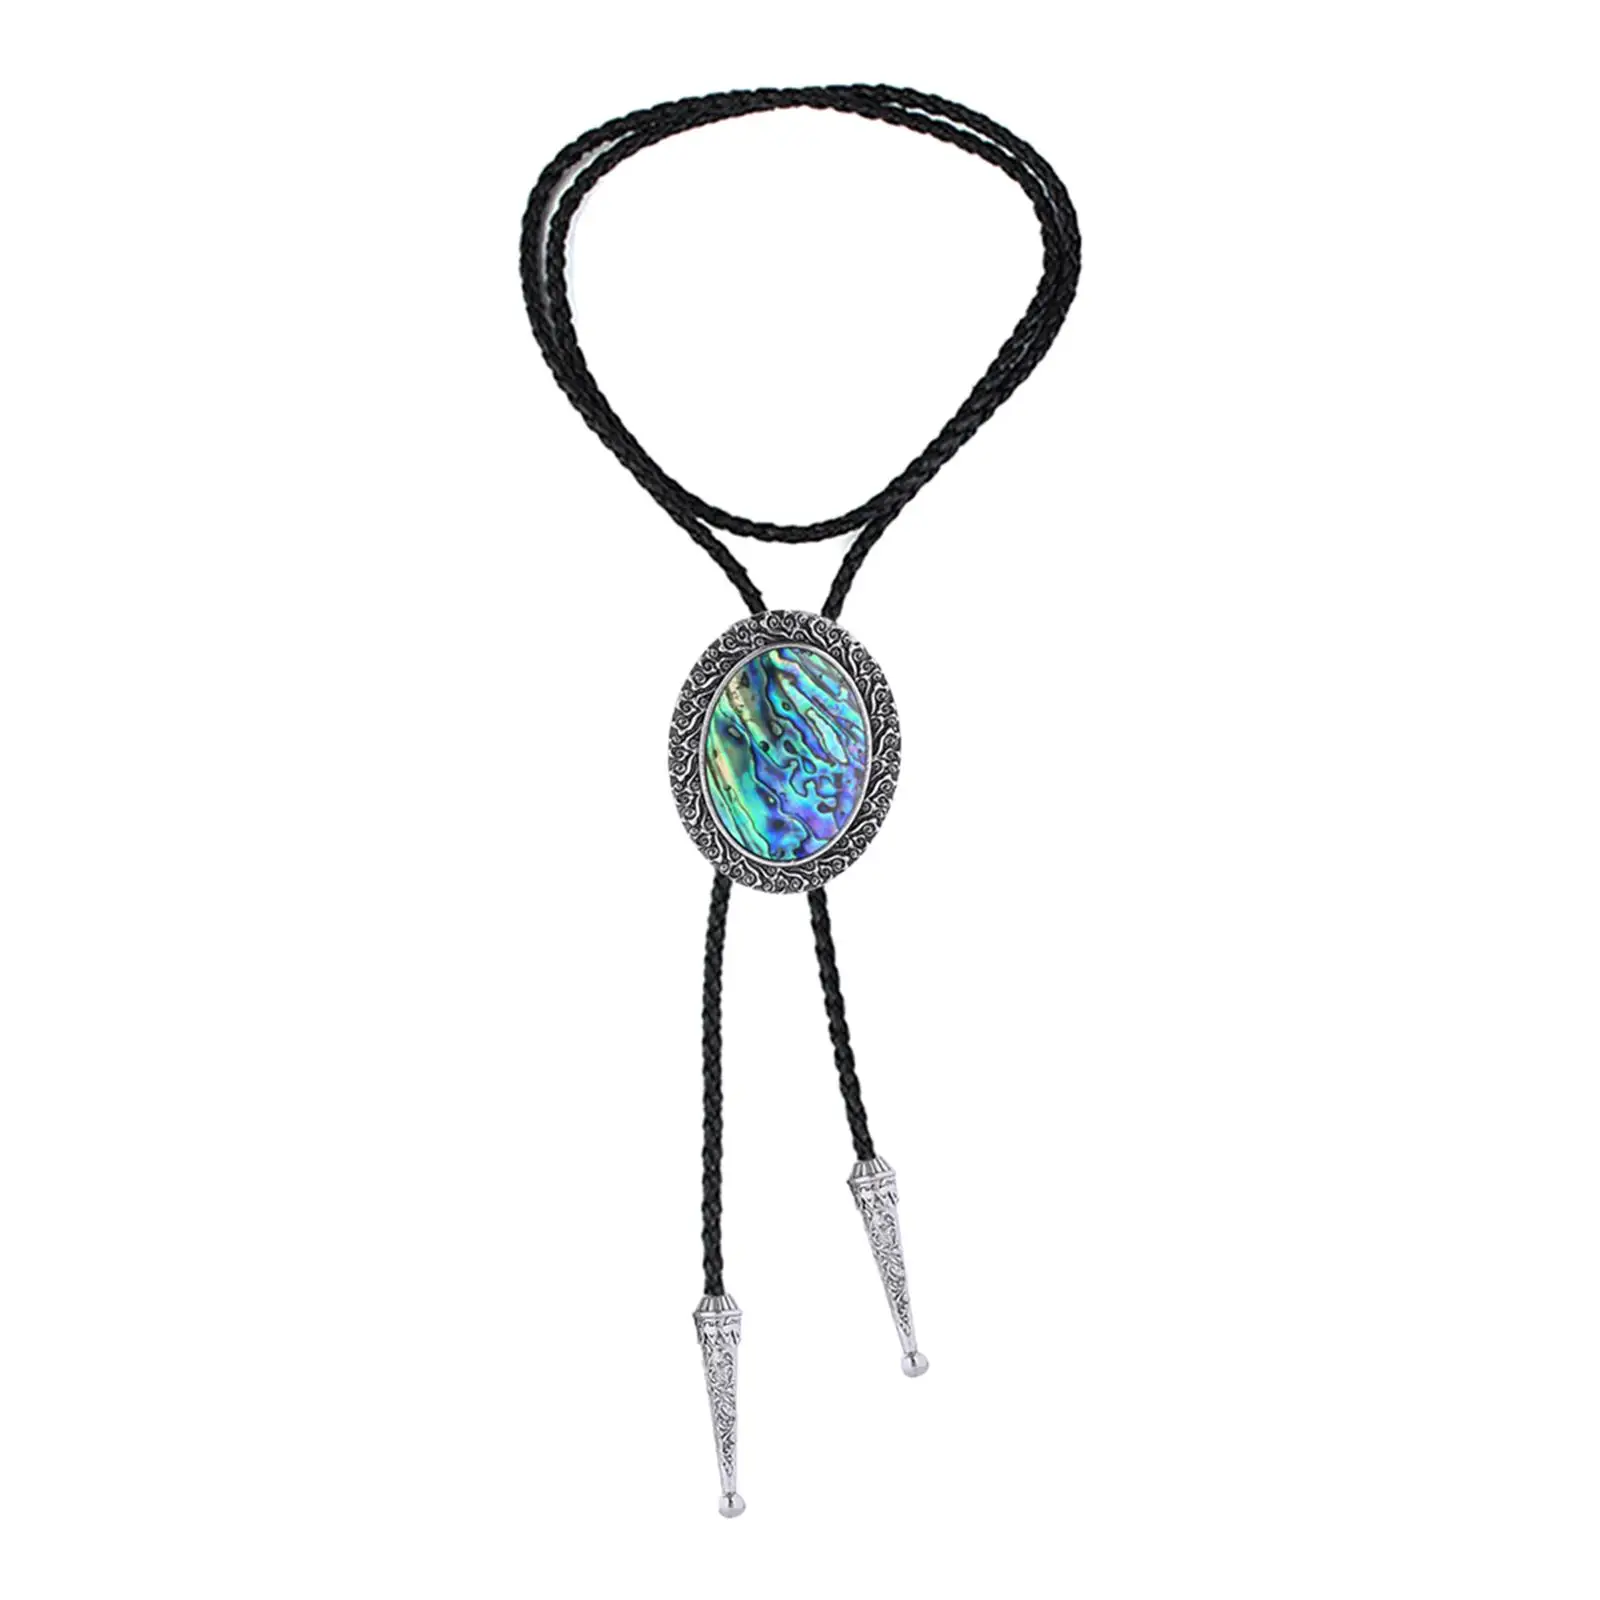 Stylish Vintage Style Bolo Tie Western Necklace Tie for Women Teens Adults Birthday Gift